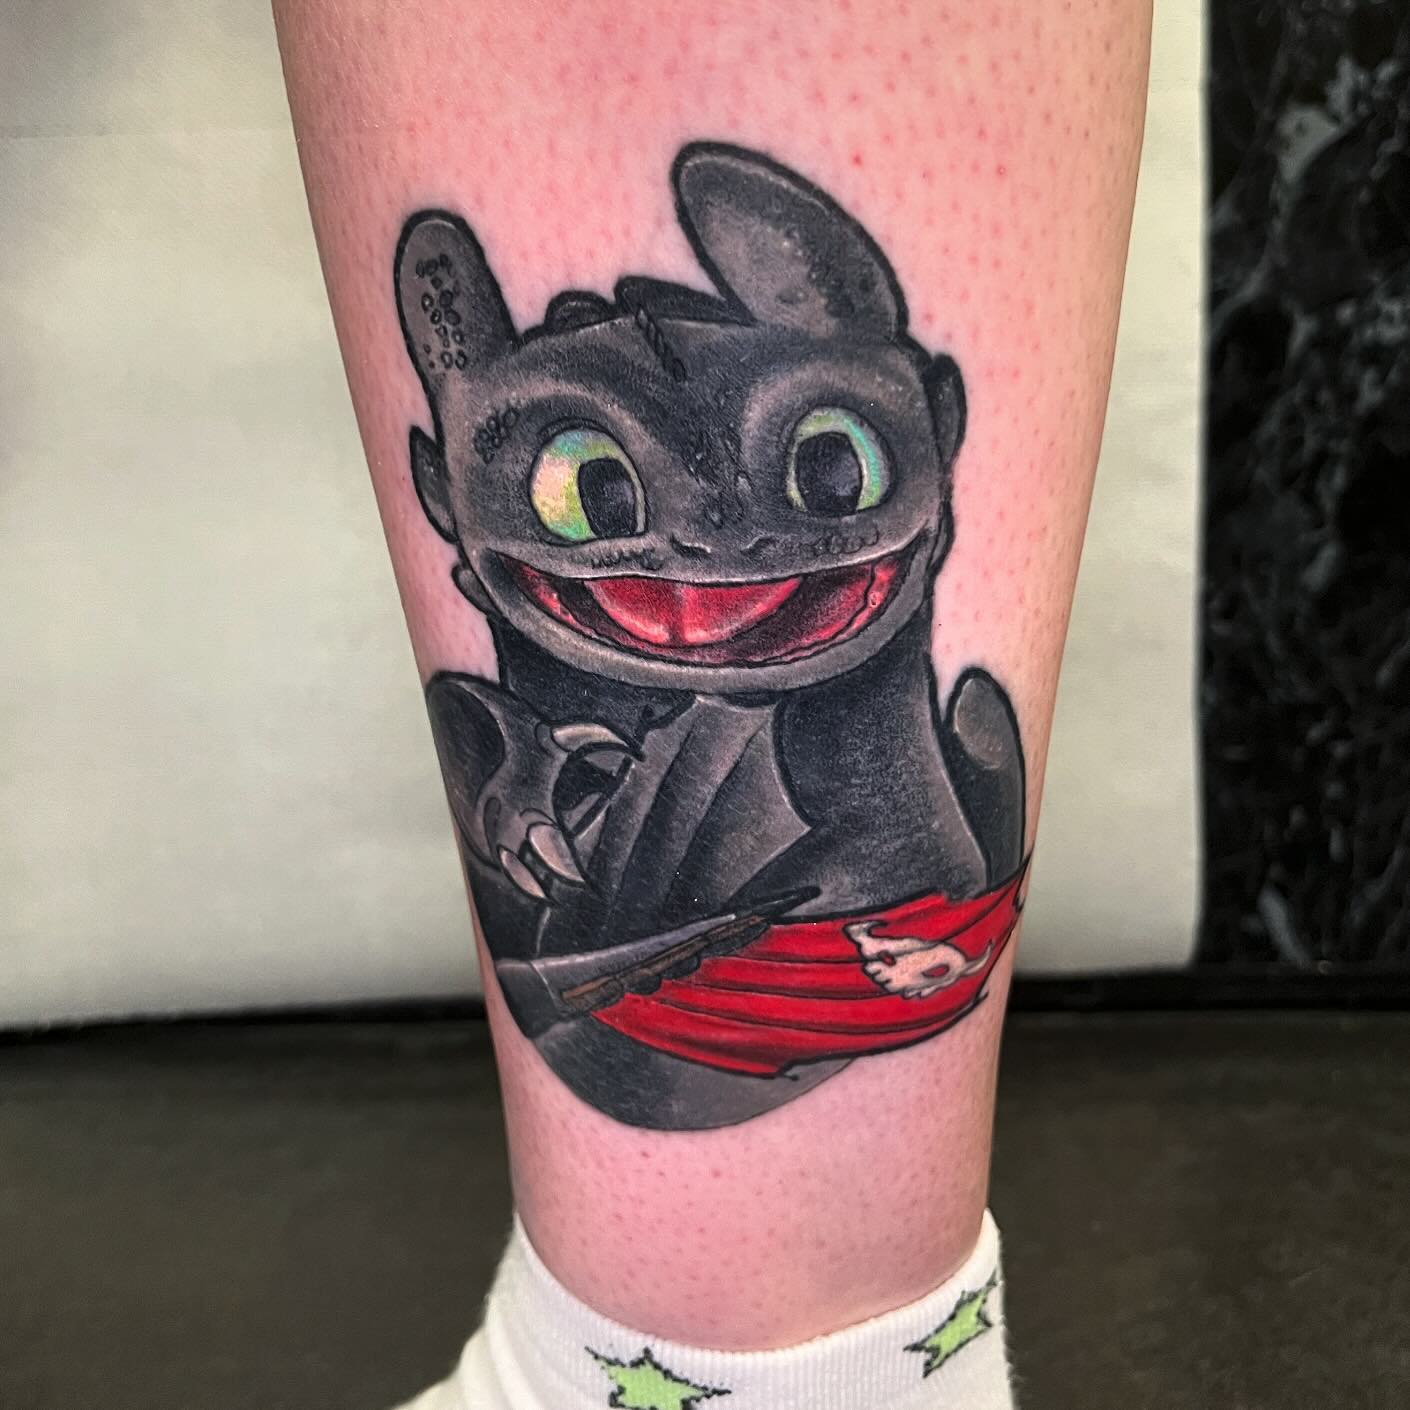 The bestest boy, all healed and settled in nicely. So chuffed with how this has settled in and always happy to tattoo Toothless. 

Some weekday availability coming up for small bits, I have plenty of predrawn designs if you’d like to take a peek at the highlighted stories. Or send me your ideas.        